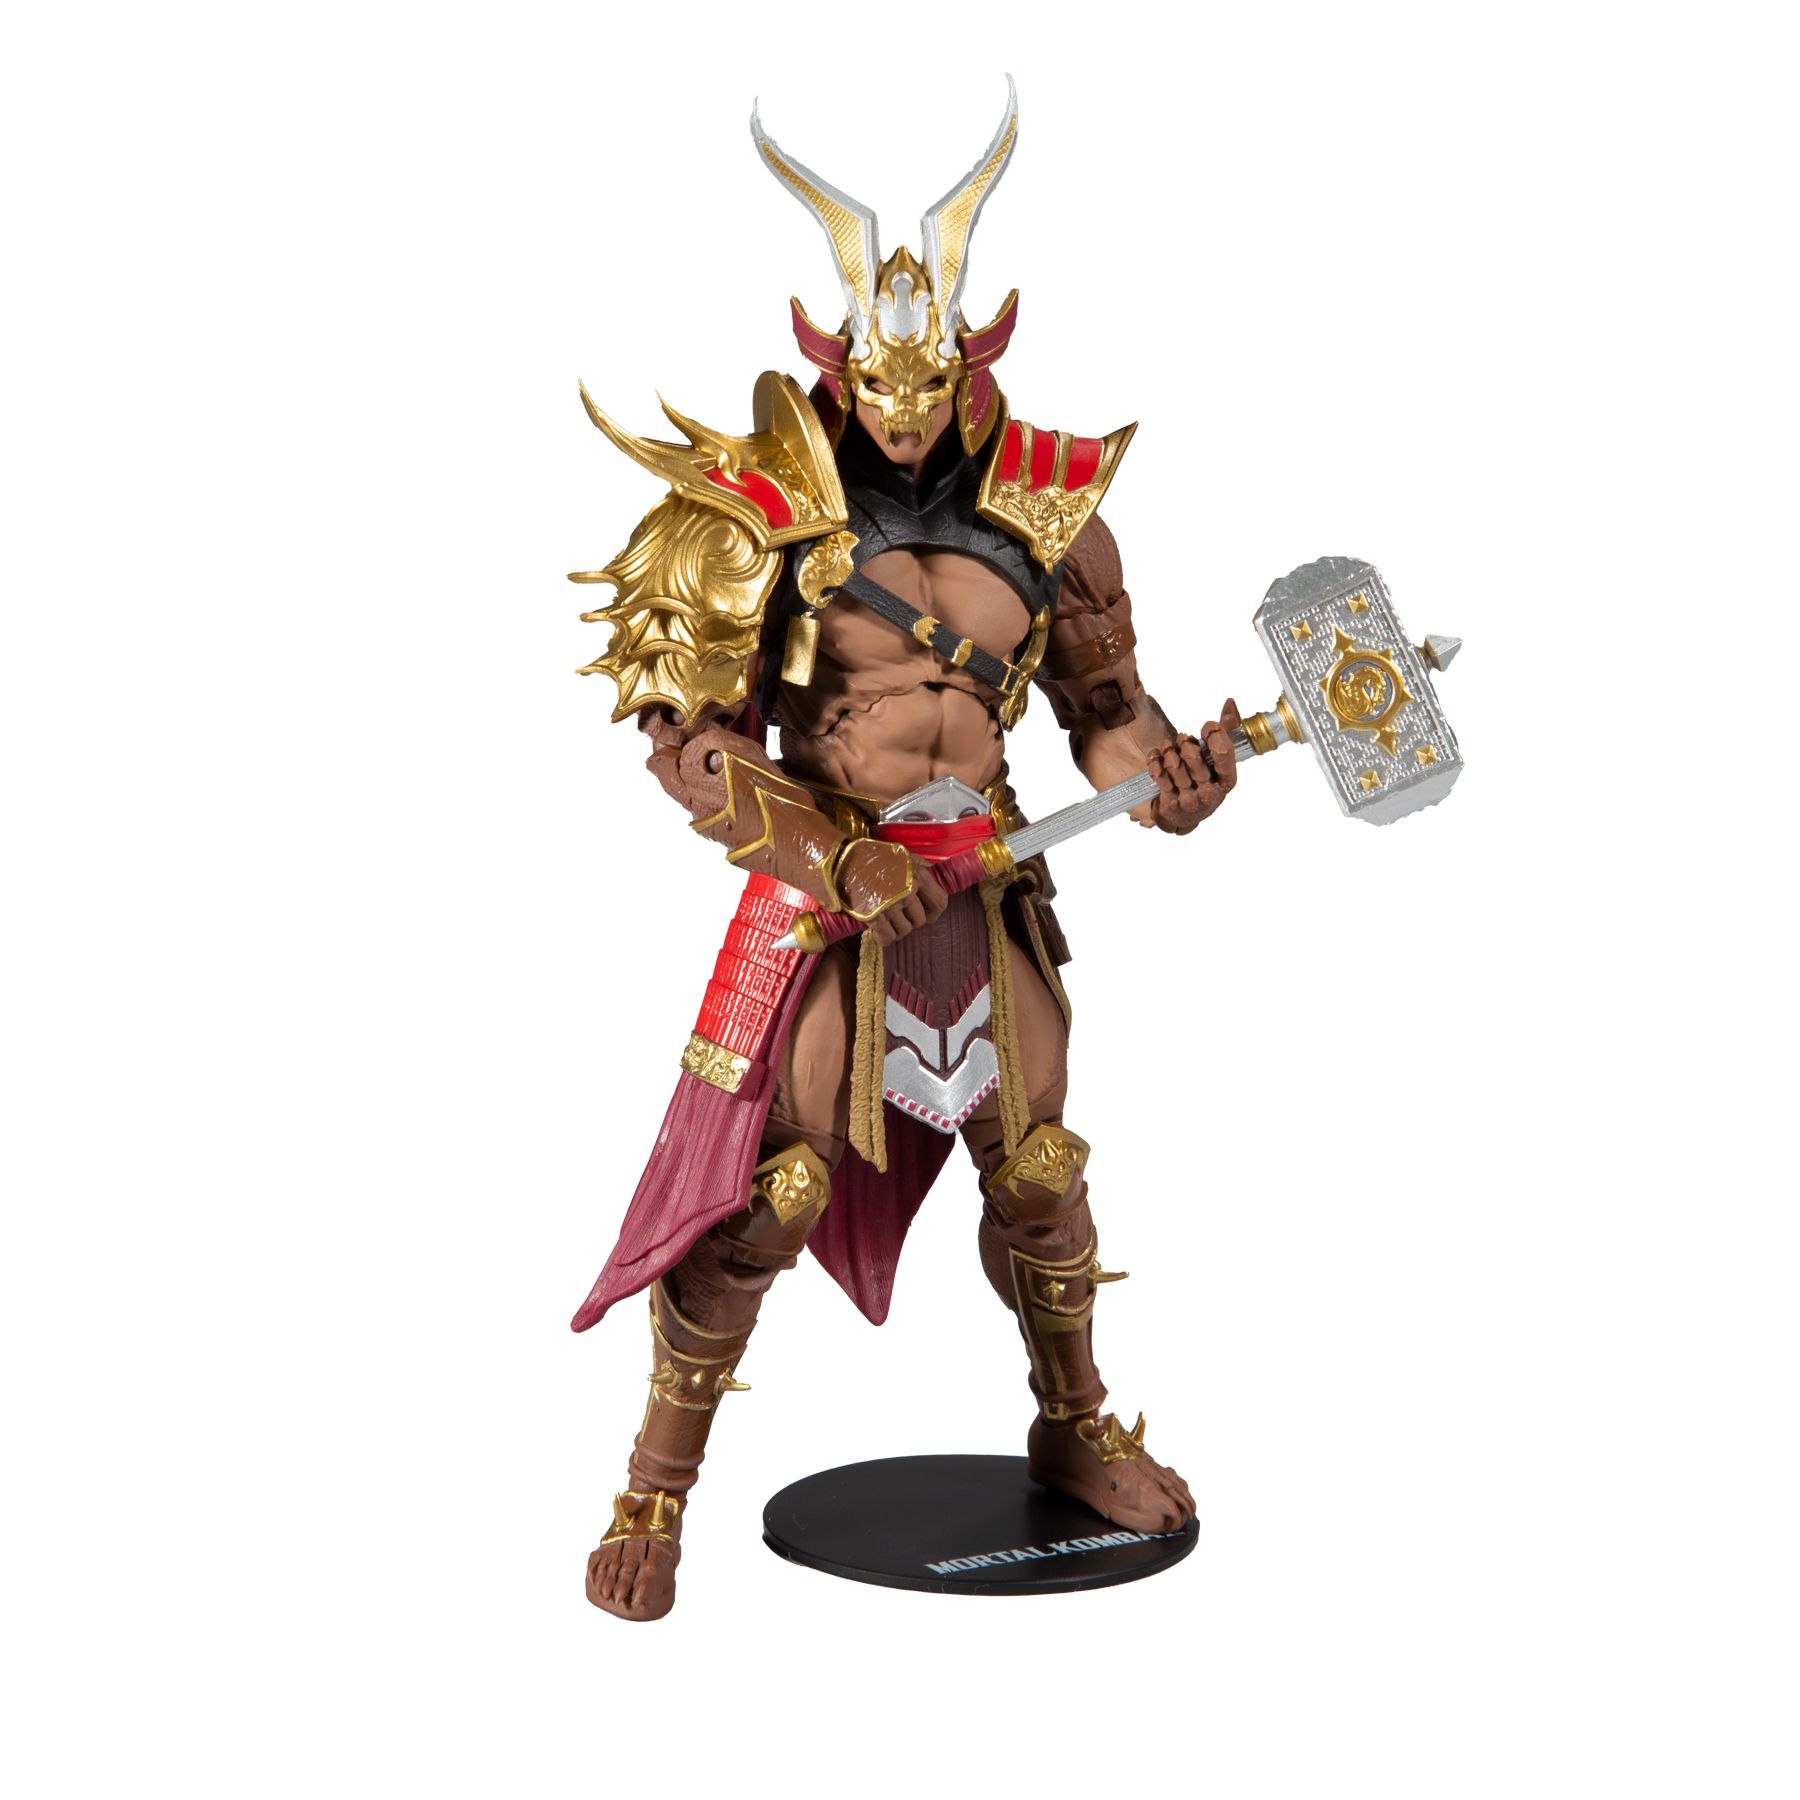 Shao Kahn collectible pro painted figurines gift from game Mortal Kombat 11